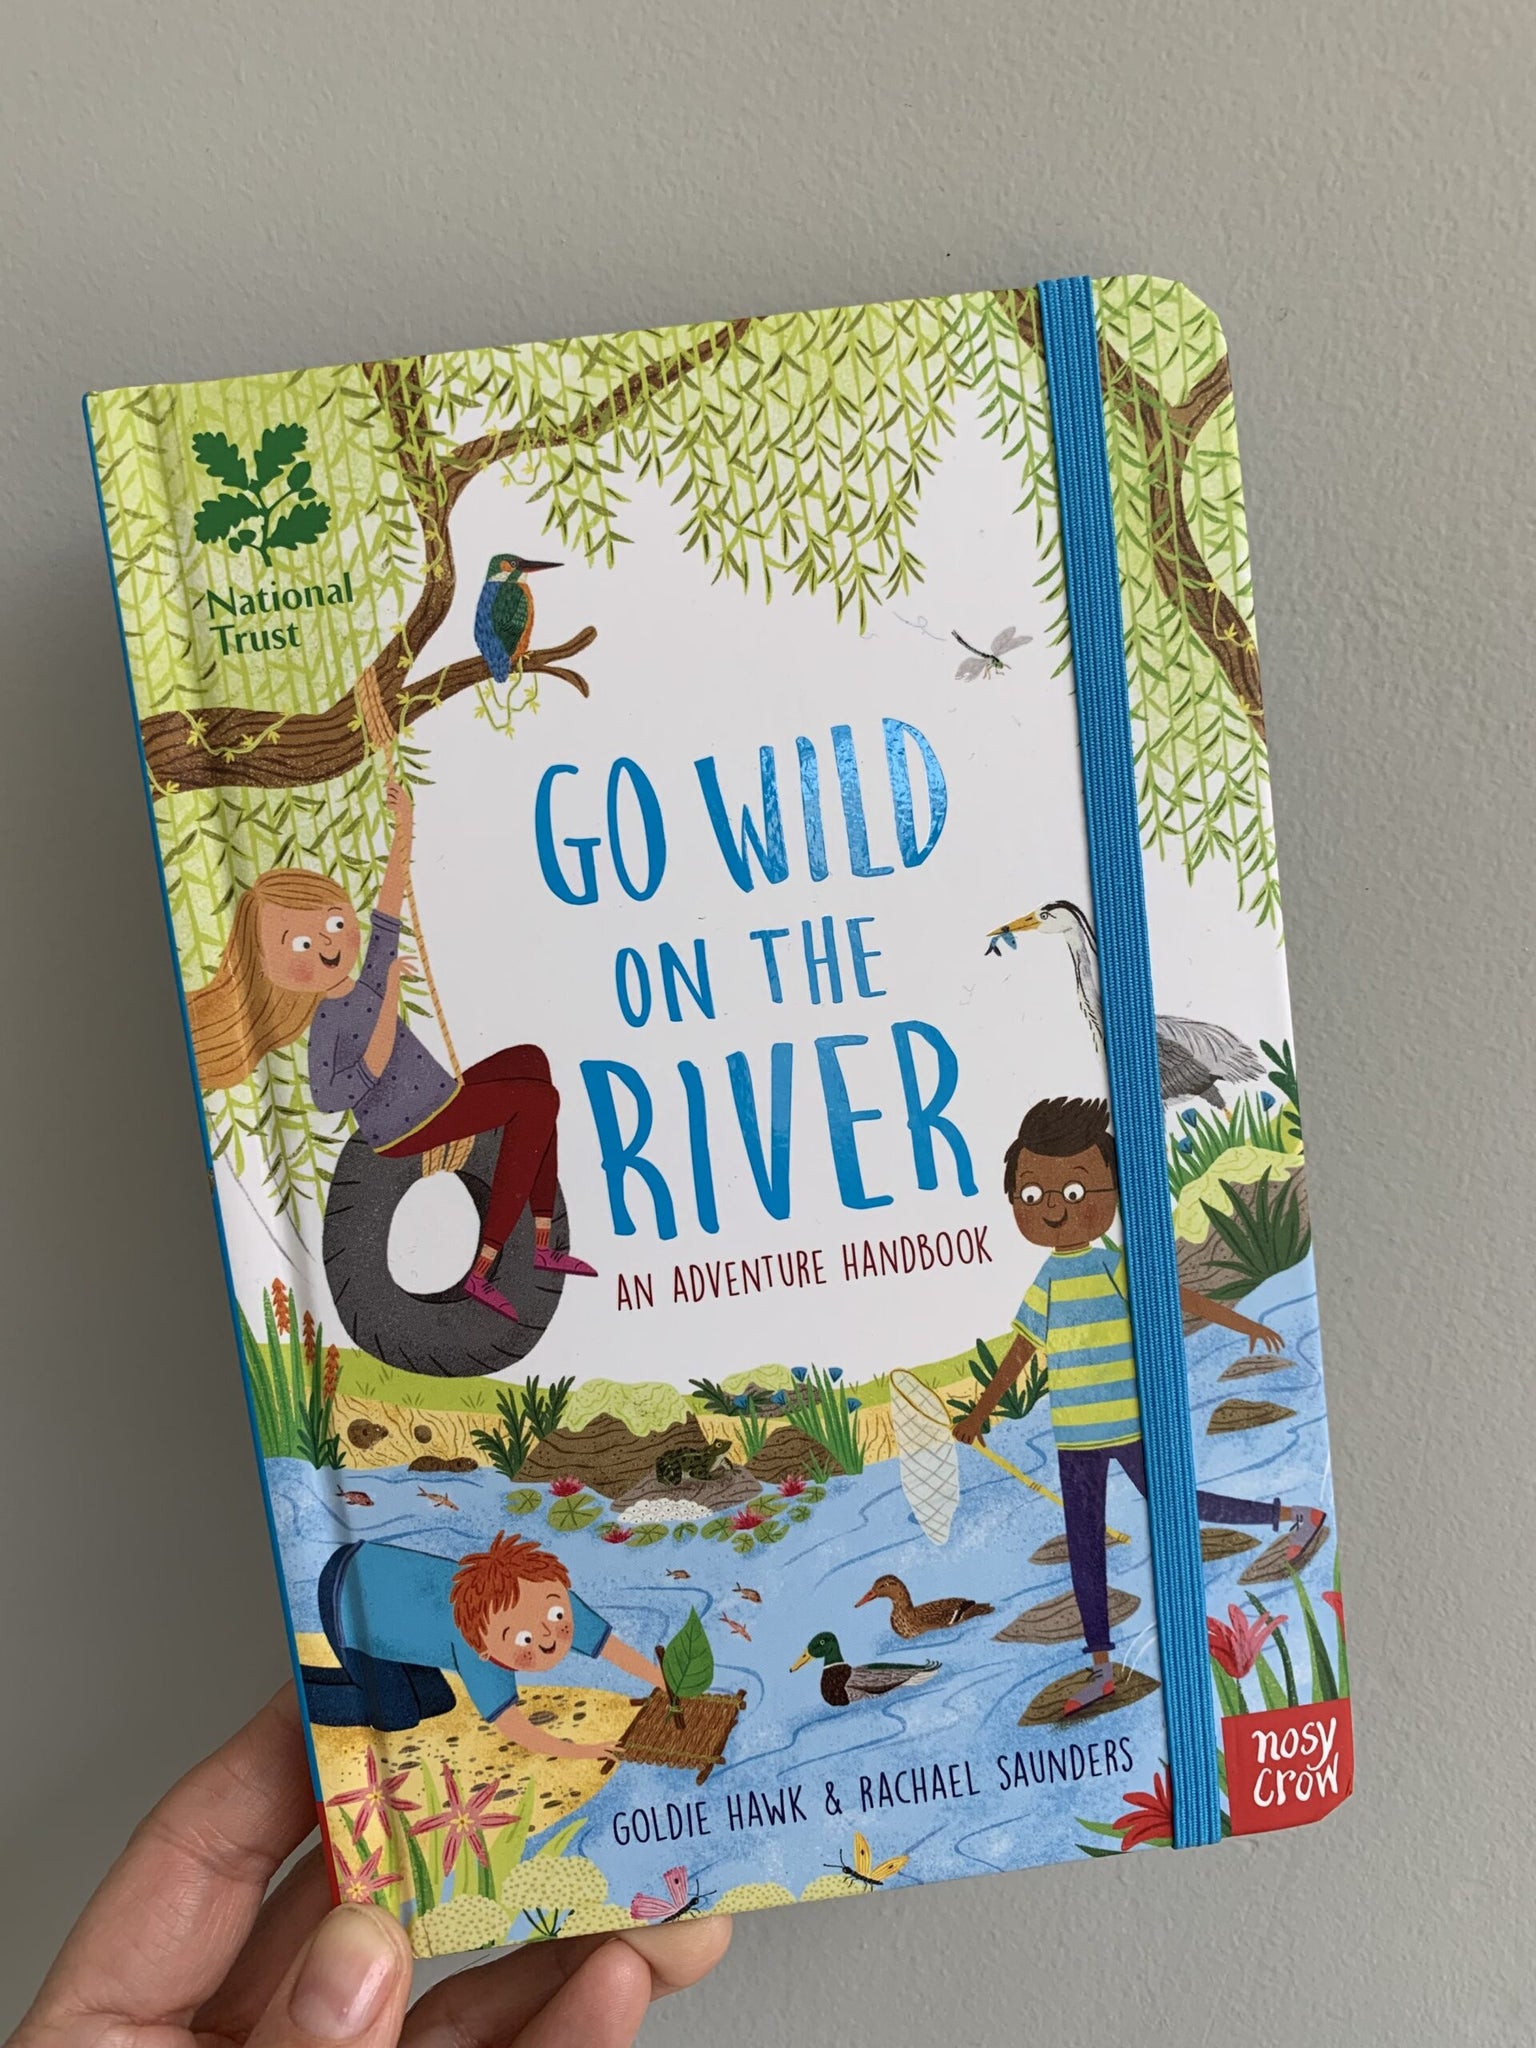 Go Wild on the River